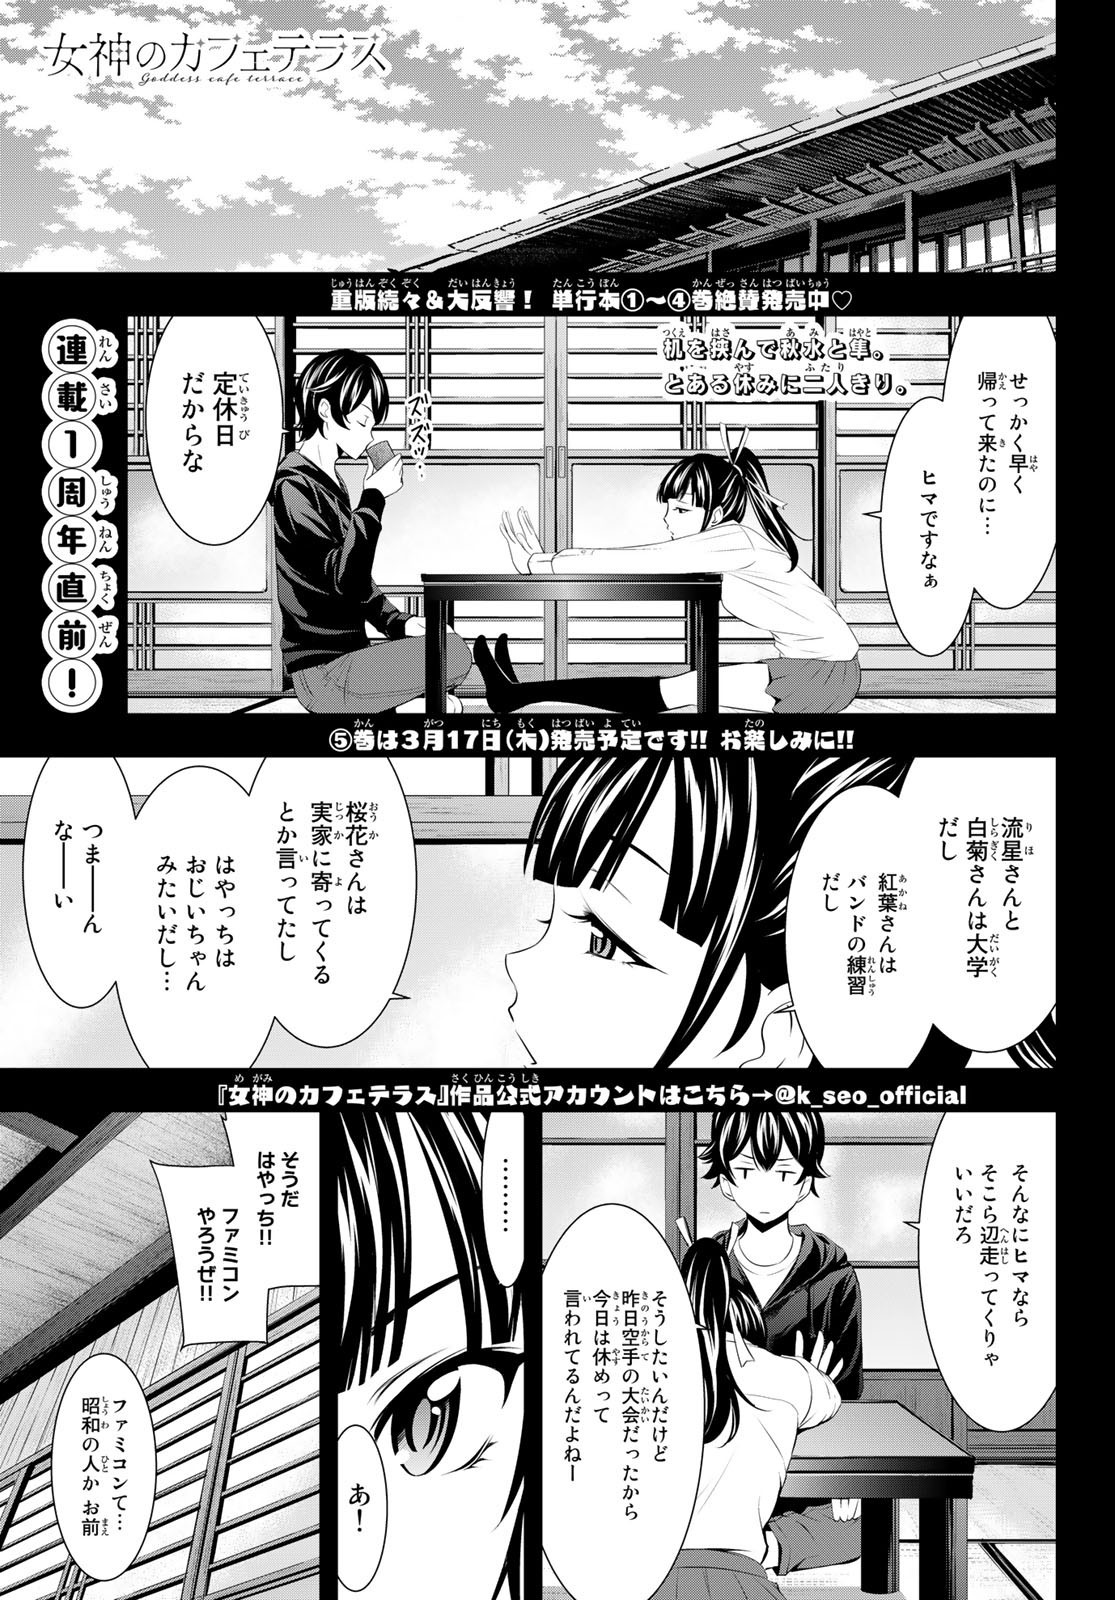 Goddess-Cafe-Terrace - Chapter 047 - Page 1